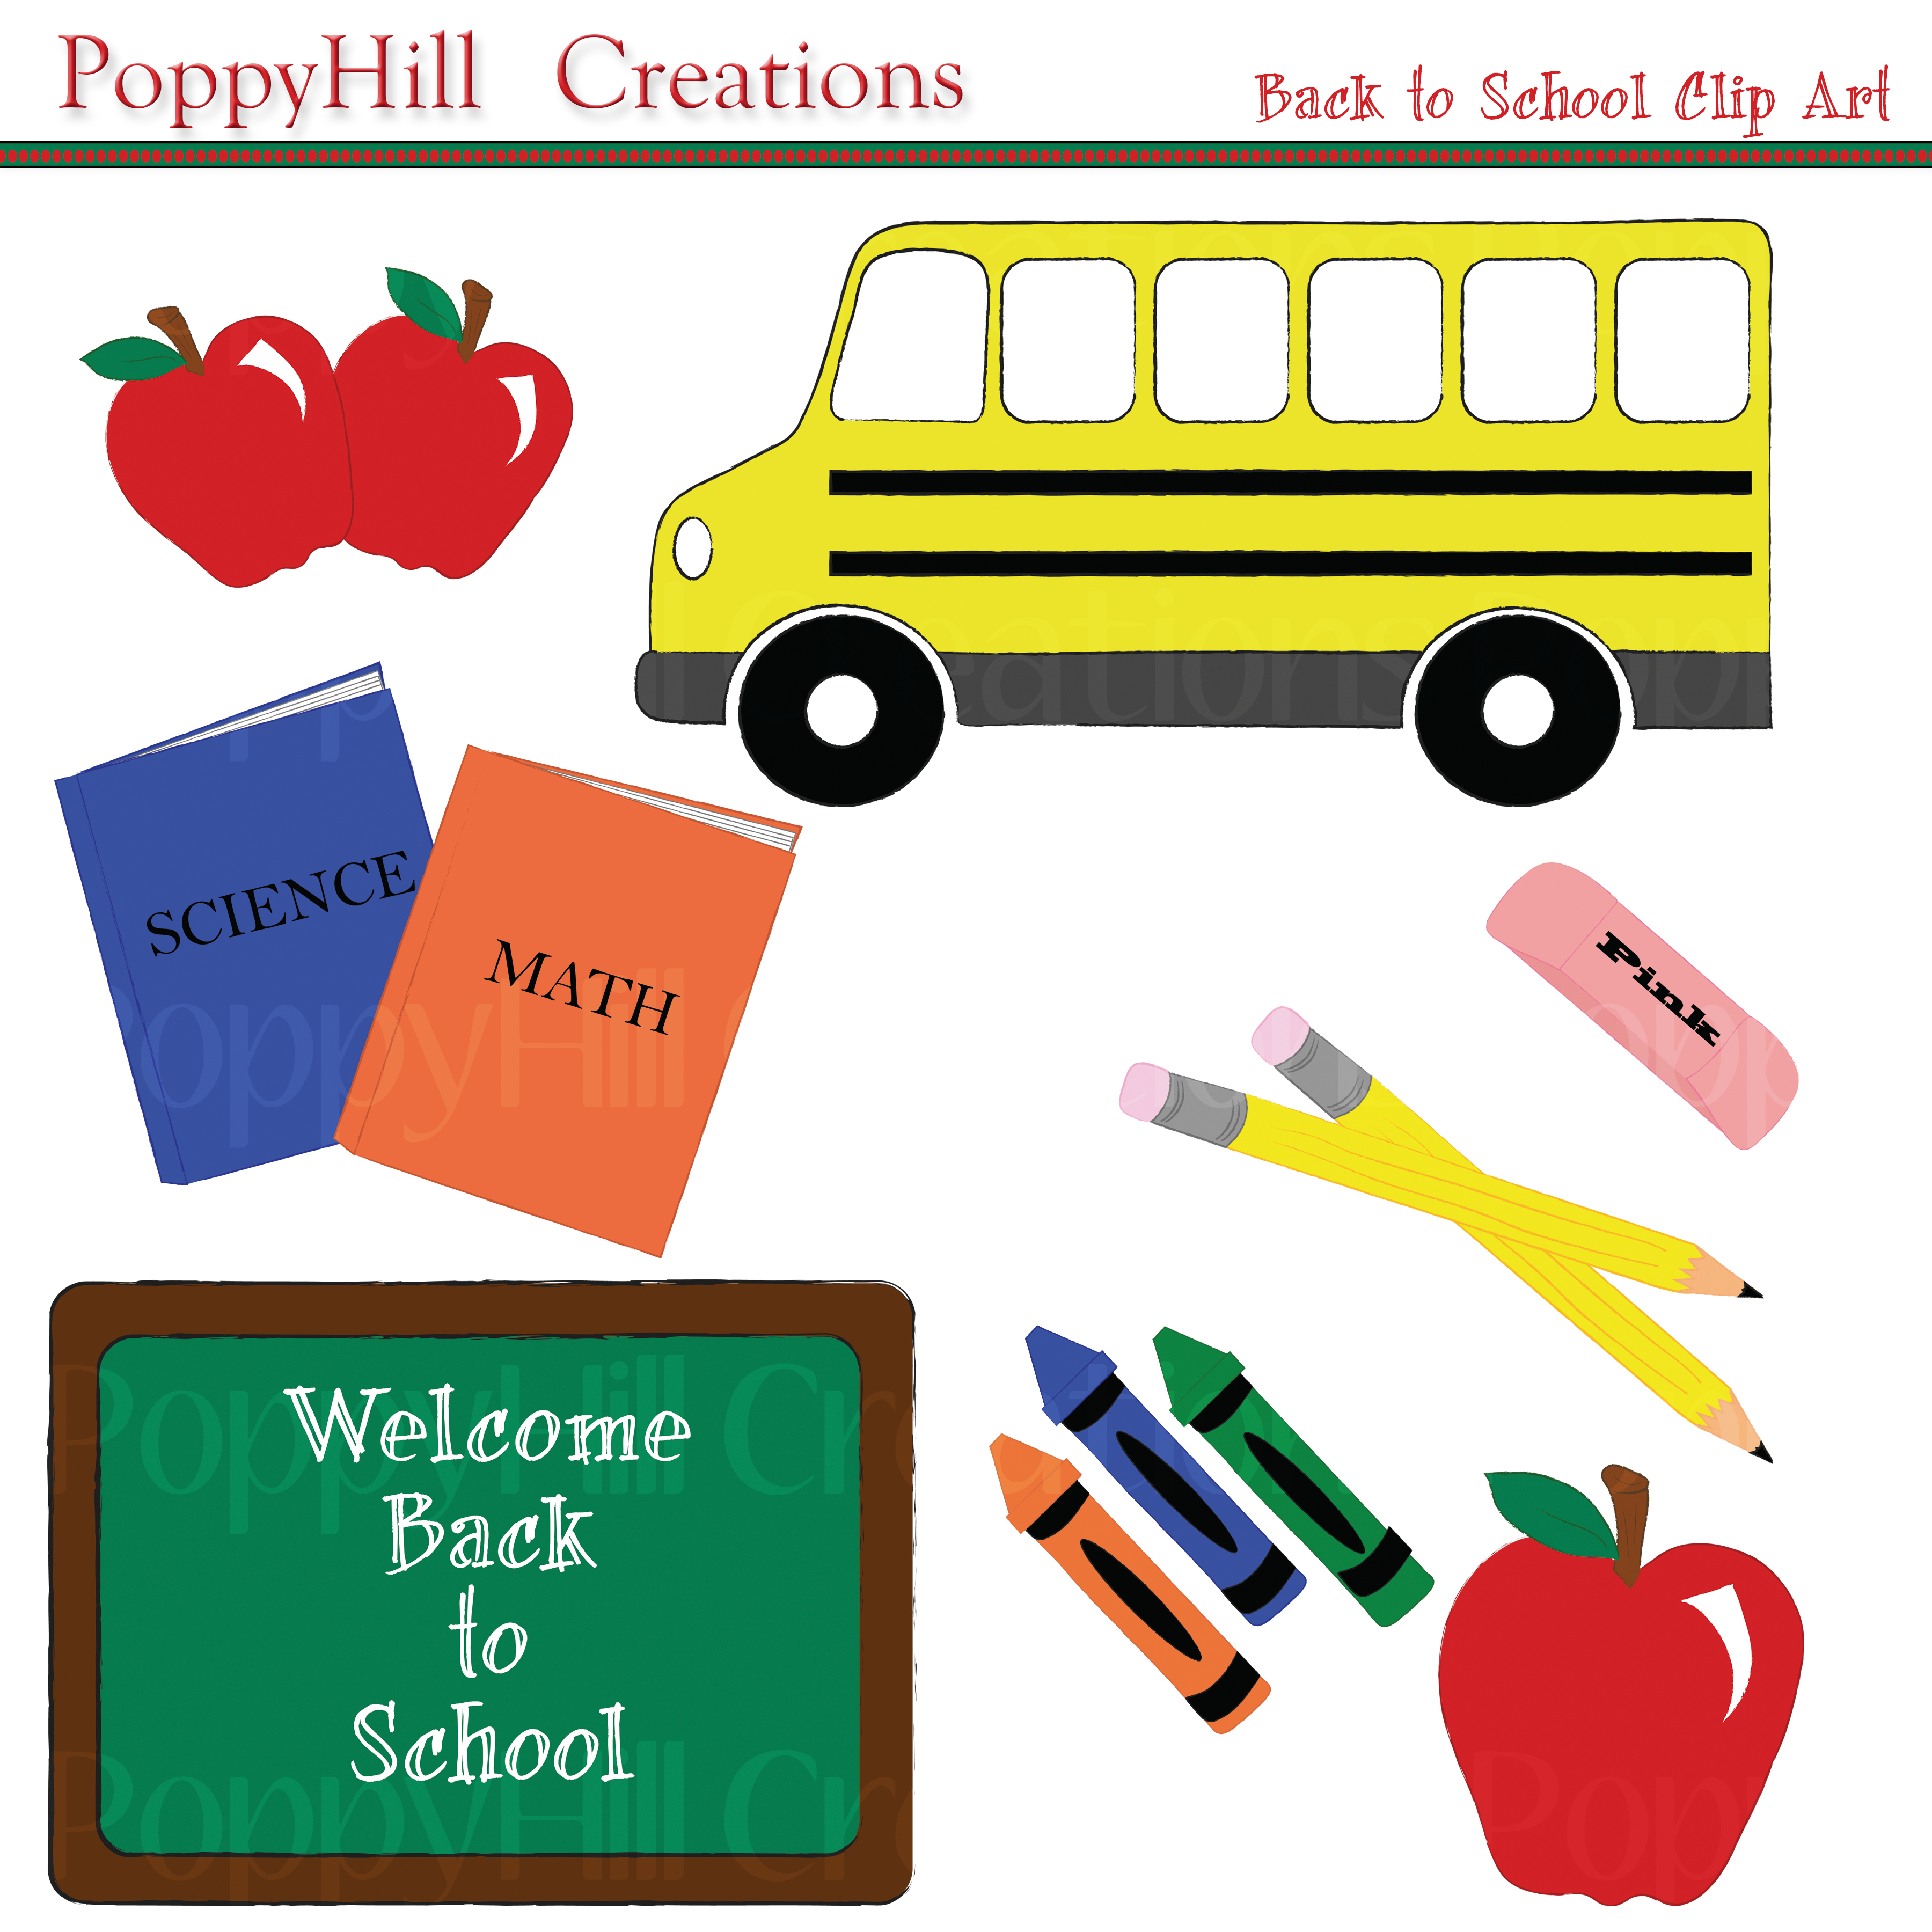 back to school images clip art - photo #45